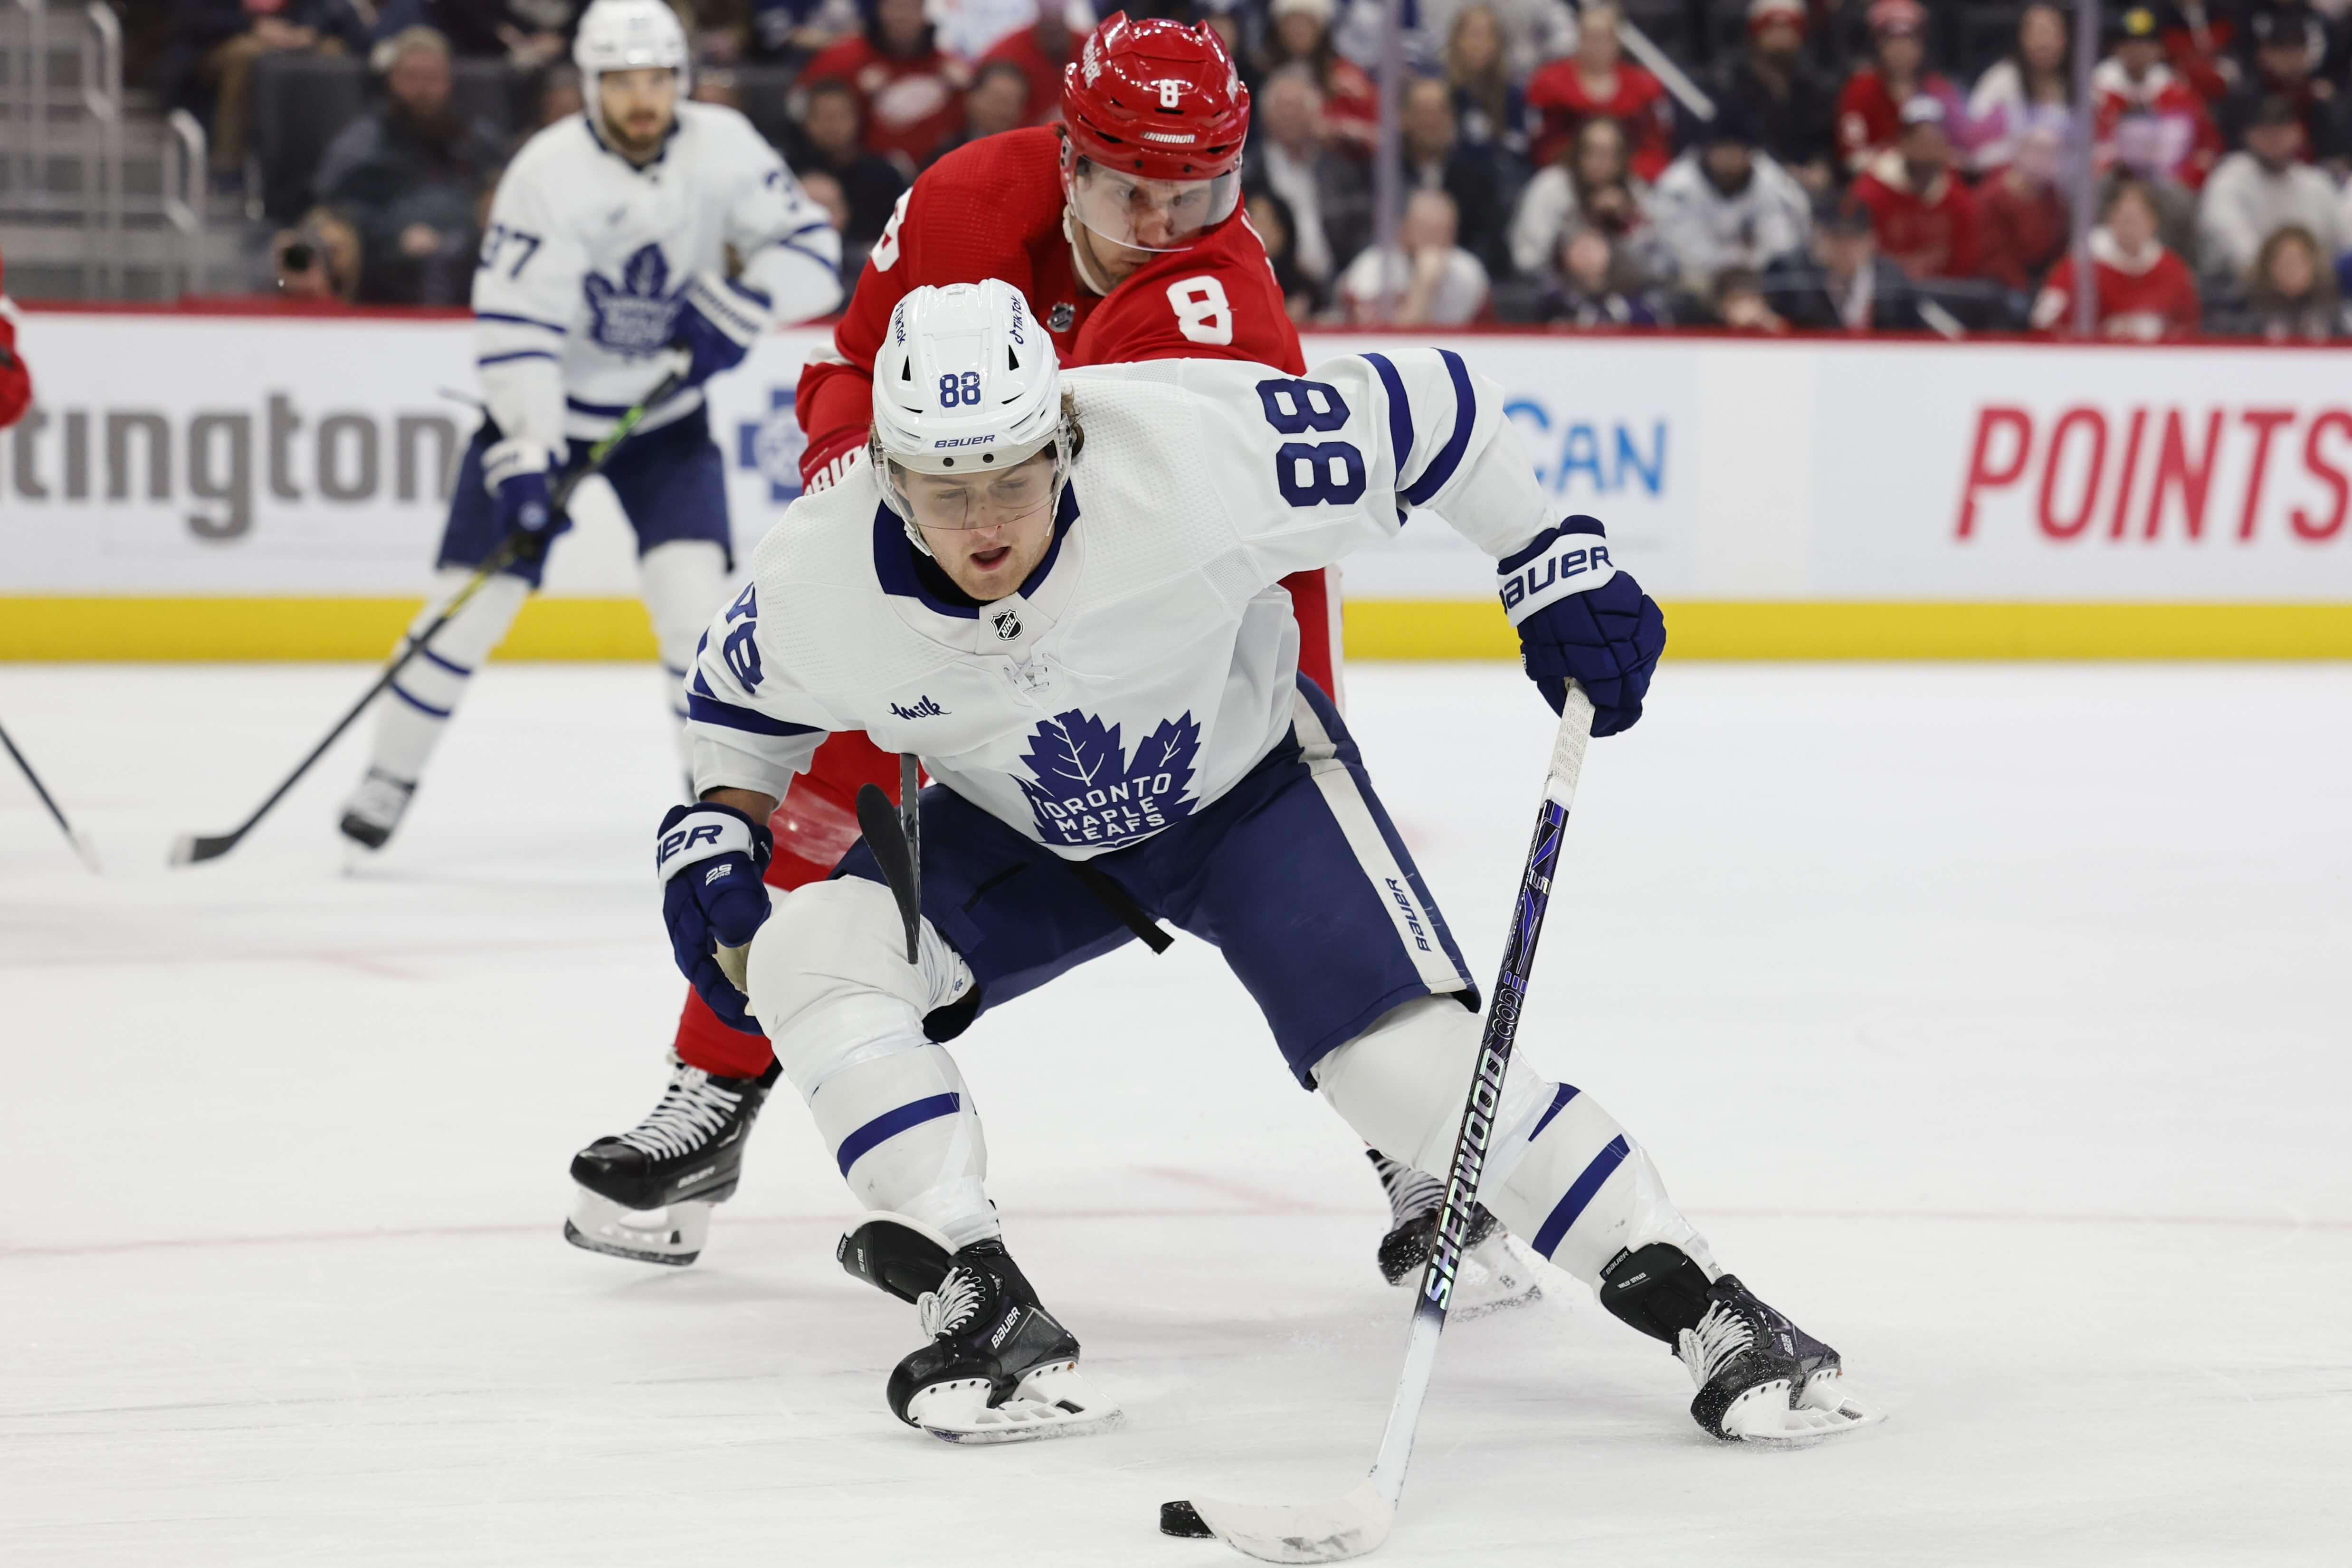 Rangers vs Maple Leafs Odds, Picks, and Predictions Tonight: Another Busy Night for Nylander